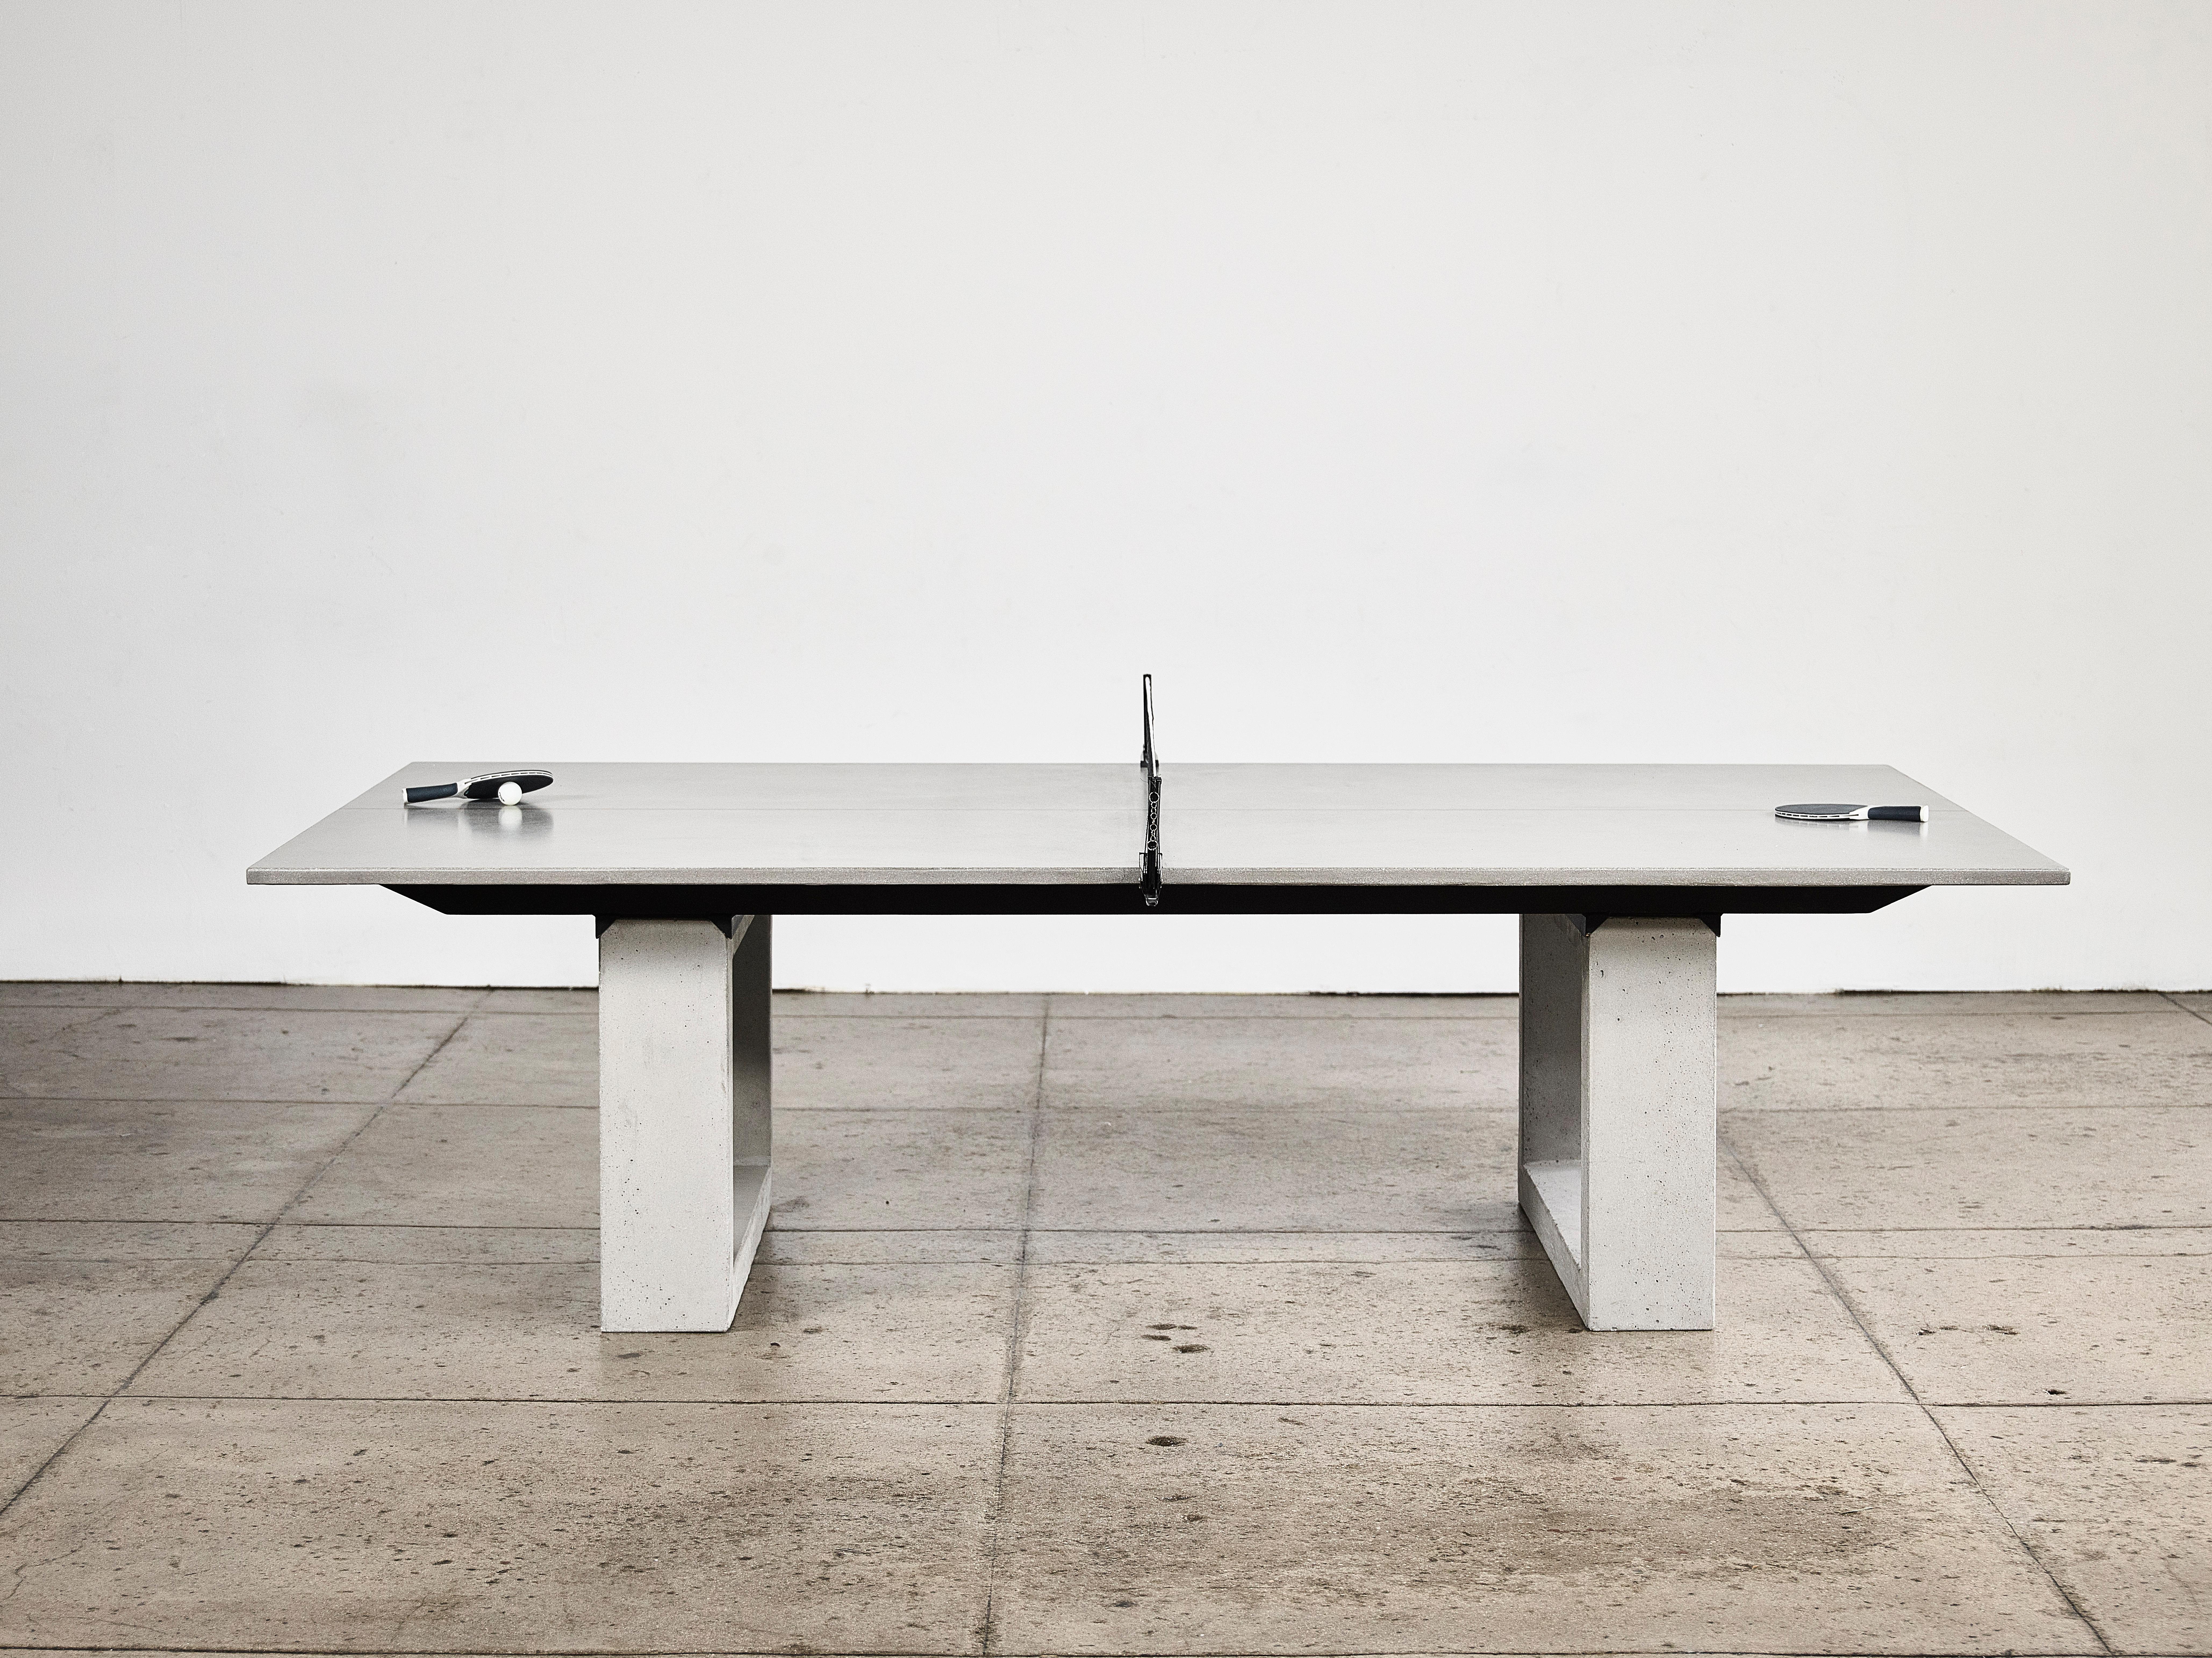 James de Wulf's commercial concrete ping-pong table, with a 1.5